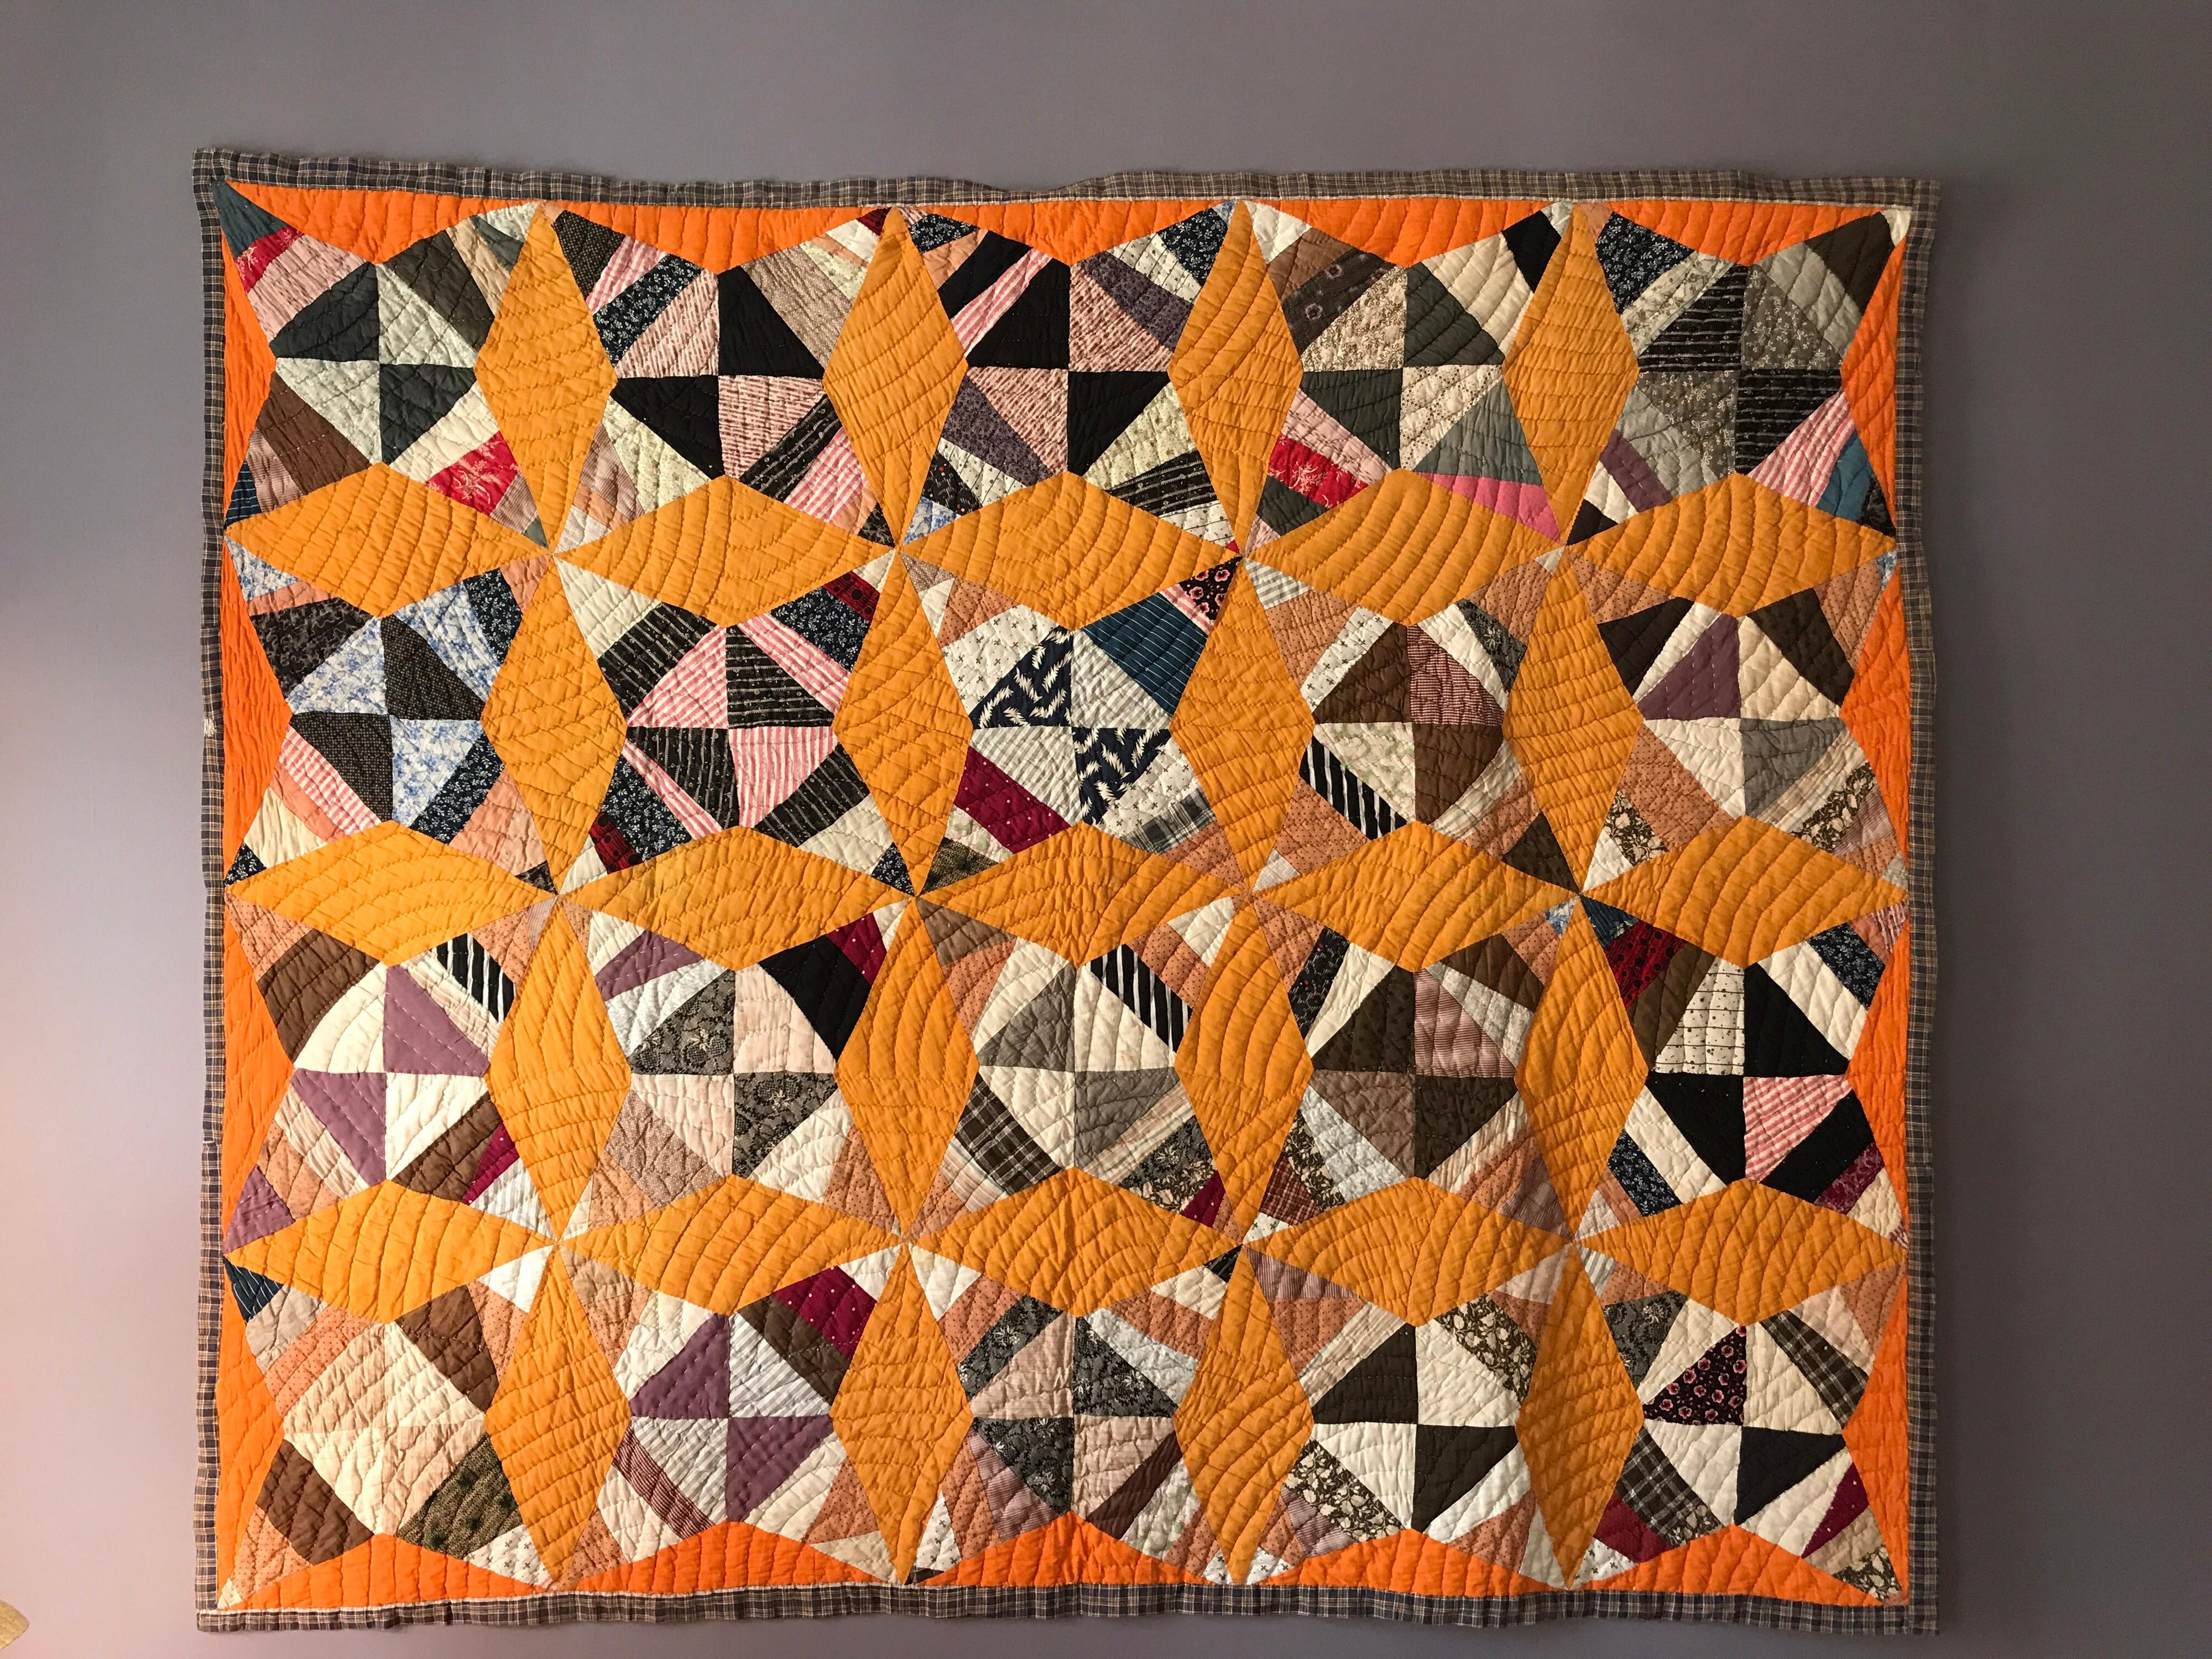 Four point star patchwork quilt from the 1930s, USA